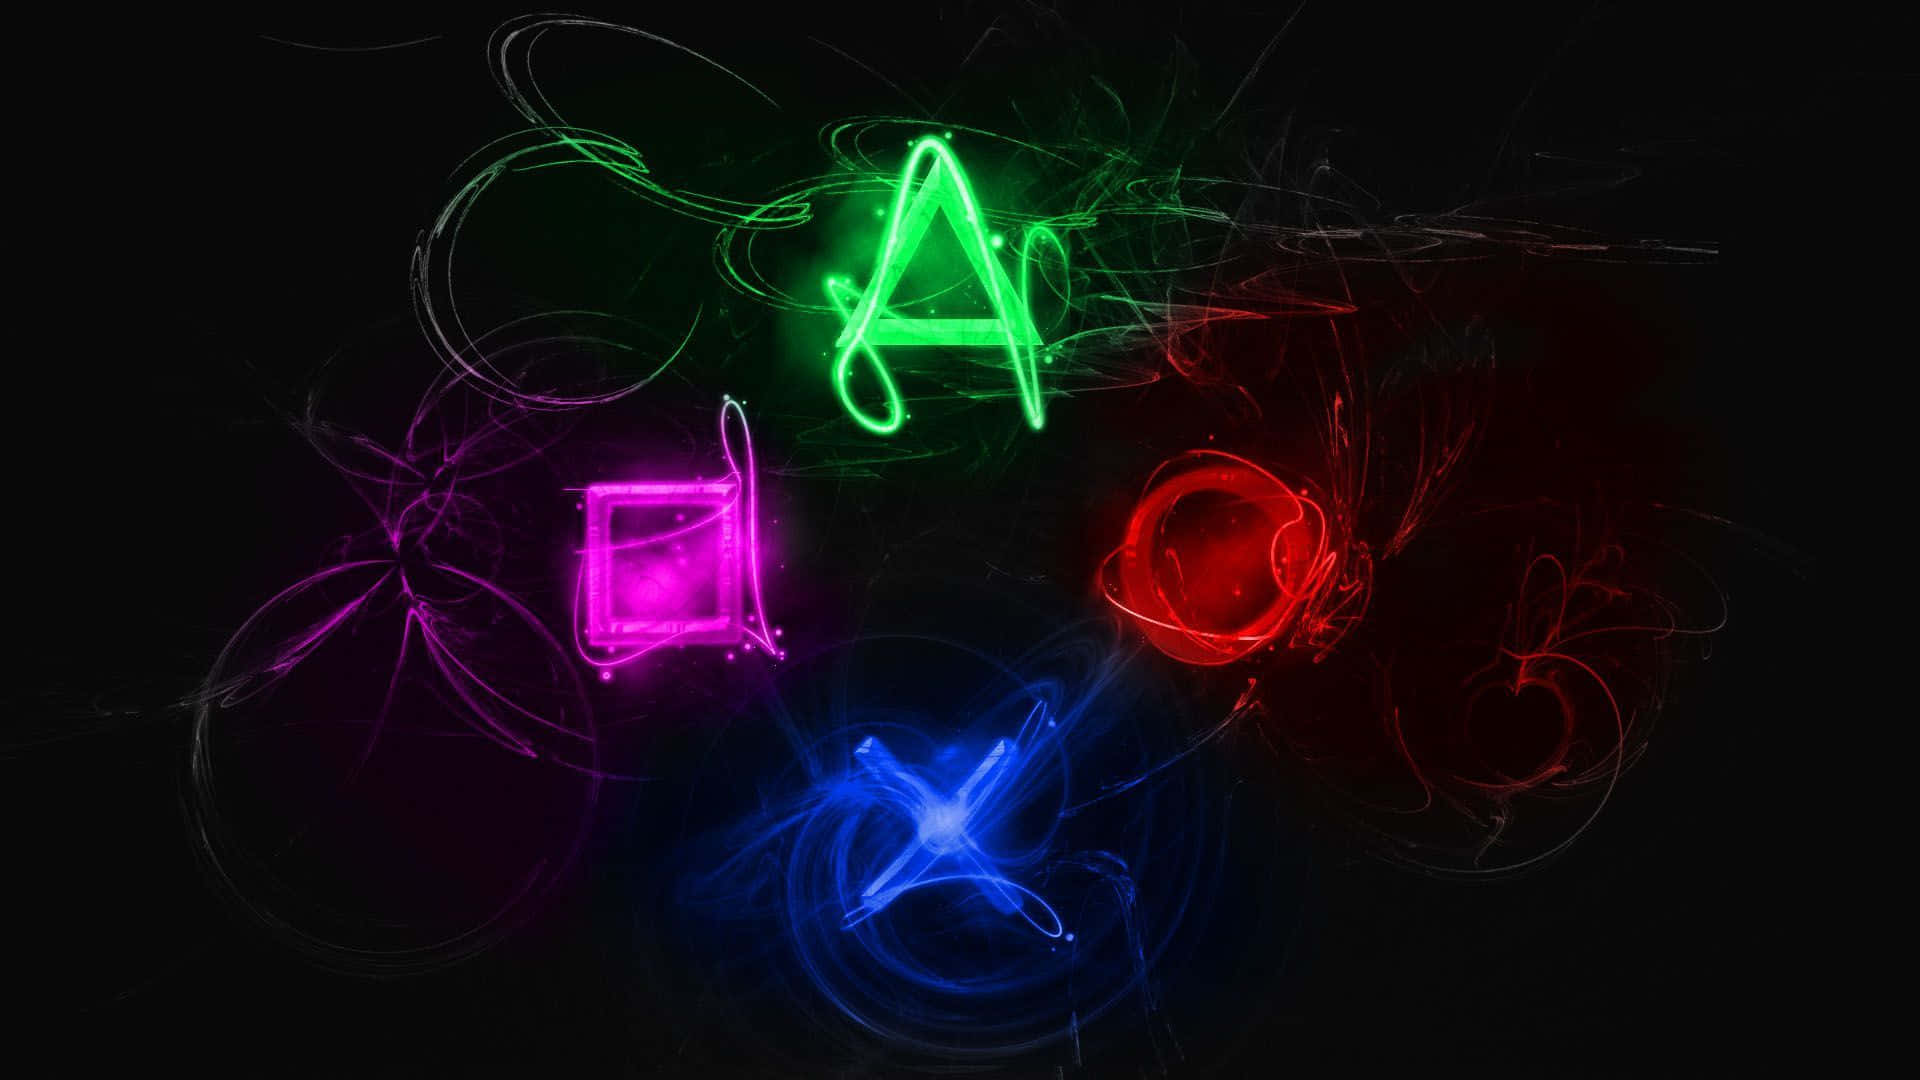 A futuristic PSP gaming wallpaper featuring striking colors and abstract design